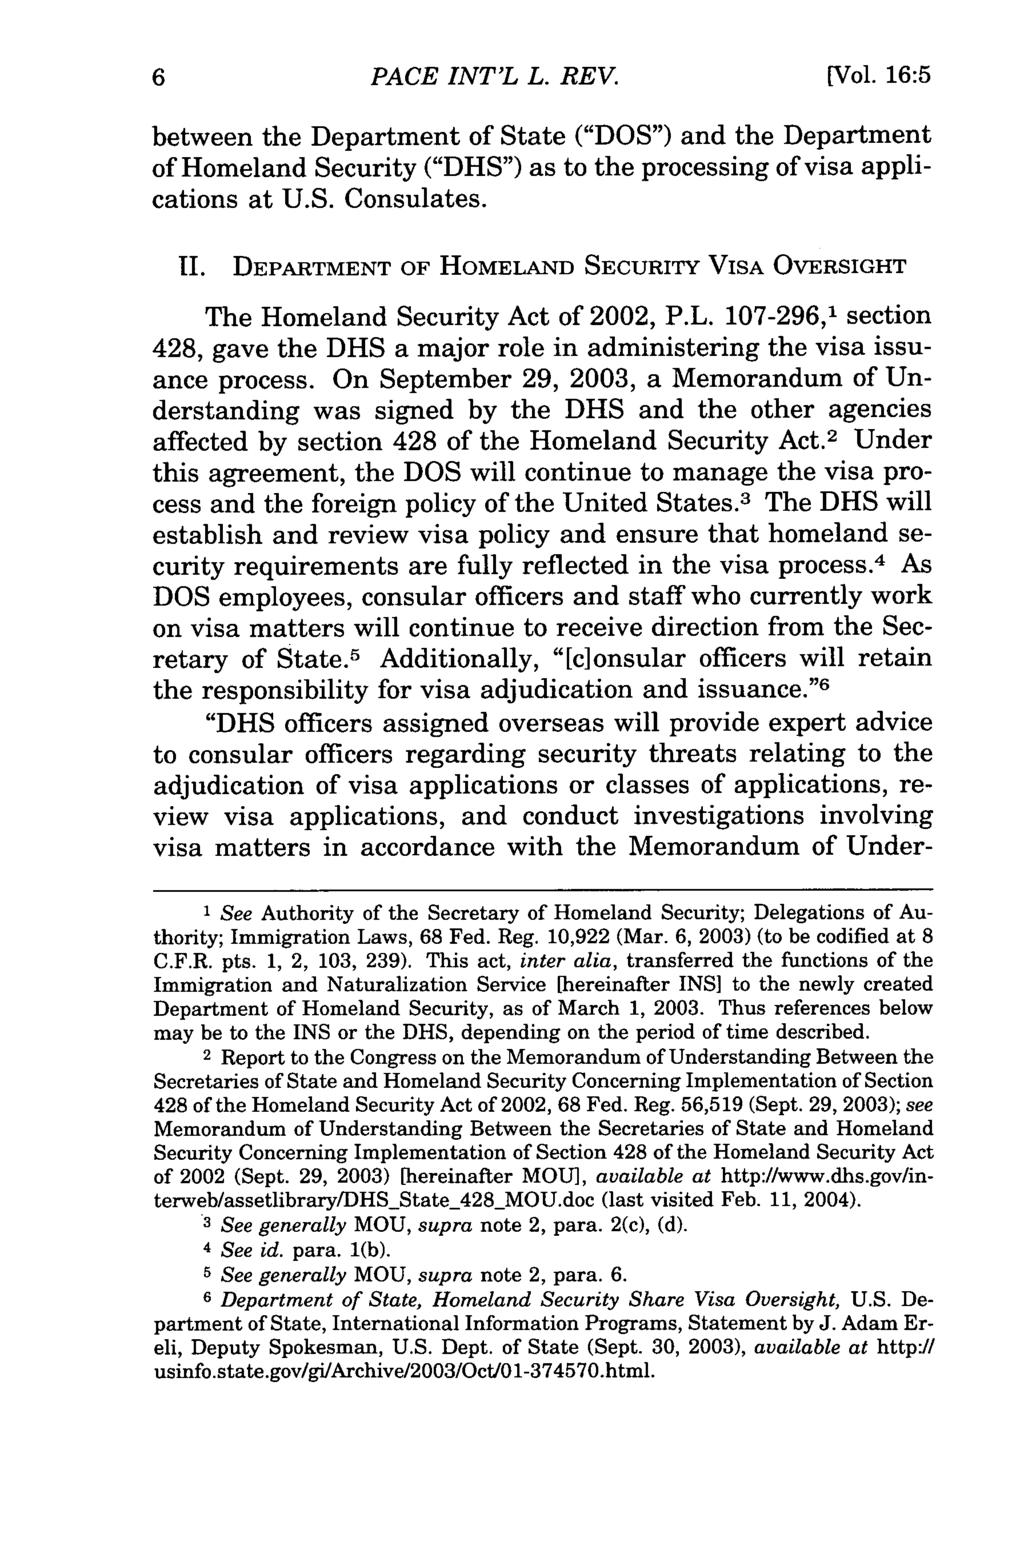 PACE INT'L L. REV. [Vol. 16:5 between the Department of State ("DOS") and the Department of Homeland Security ("DHS") as to the processing of visa applications at U.S. Consulates. II.